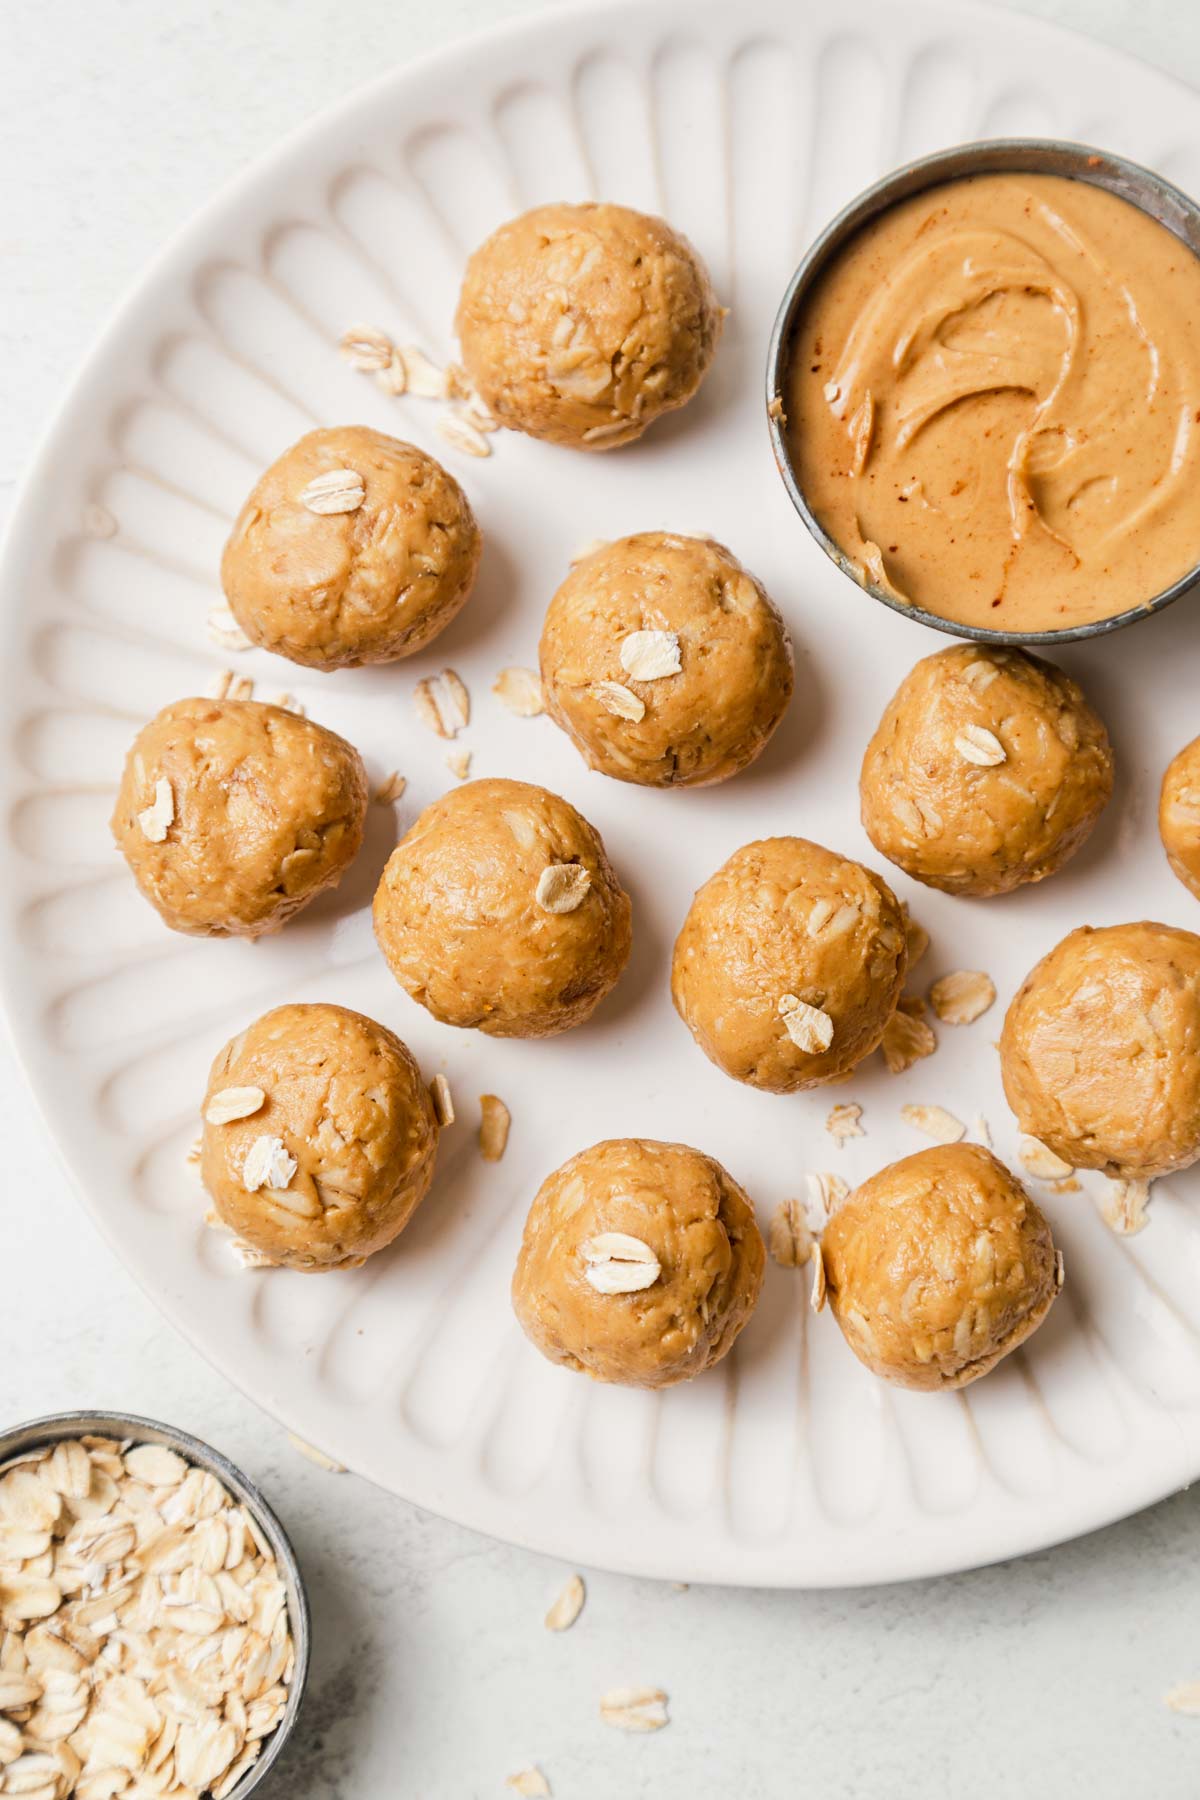 3 ingredient peanut butter balls on a plate with oats and peanut butter.